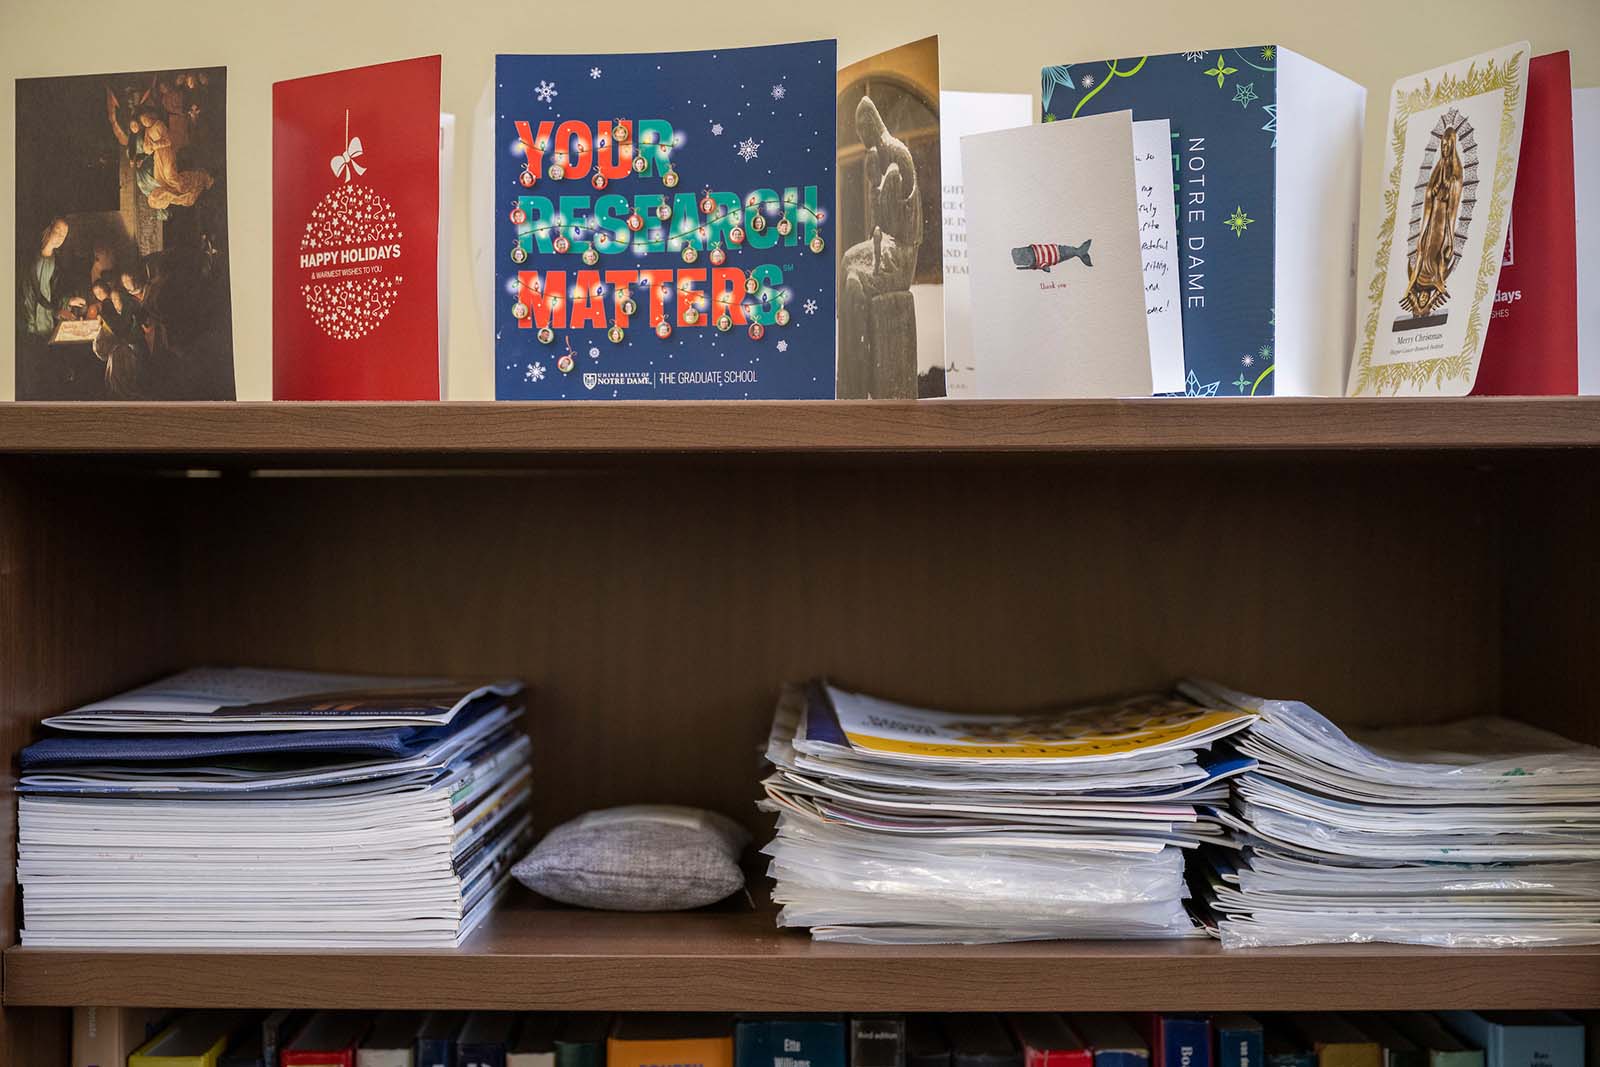 A shelf with stacks of papers and magazines, and holiday cards displayed at the top.